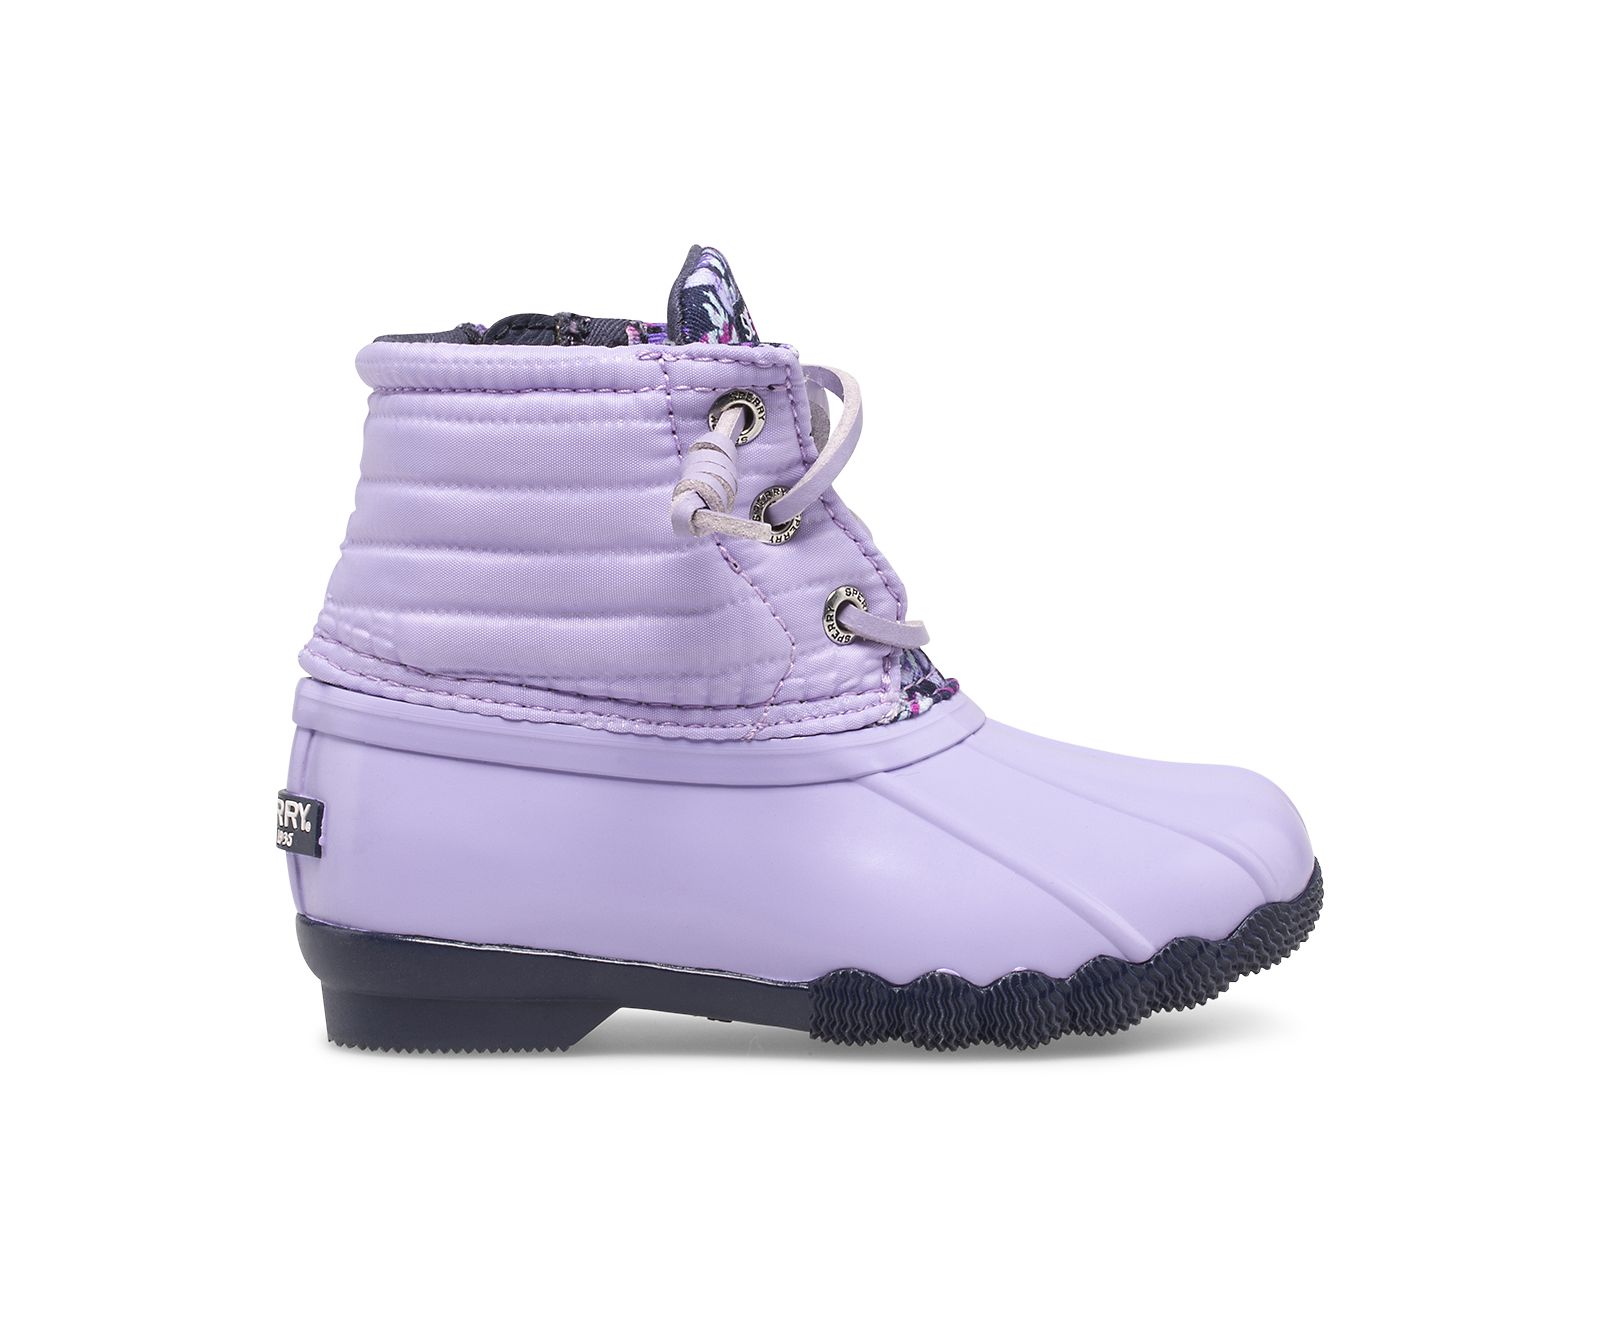 Little Kid's Saltwater Duck Boot - Lilac